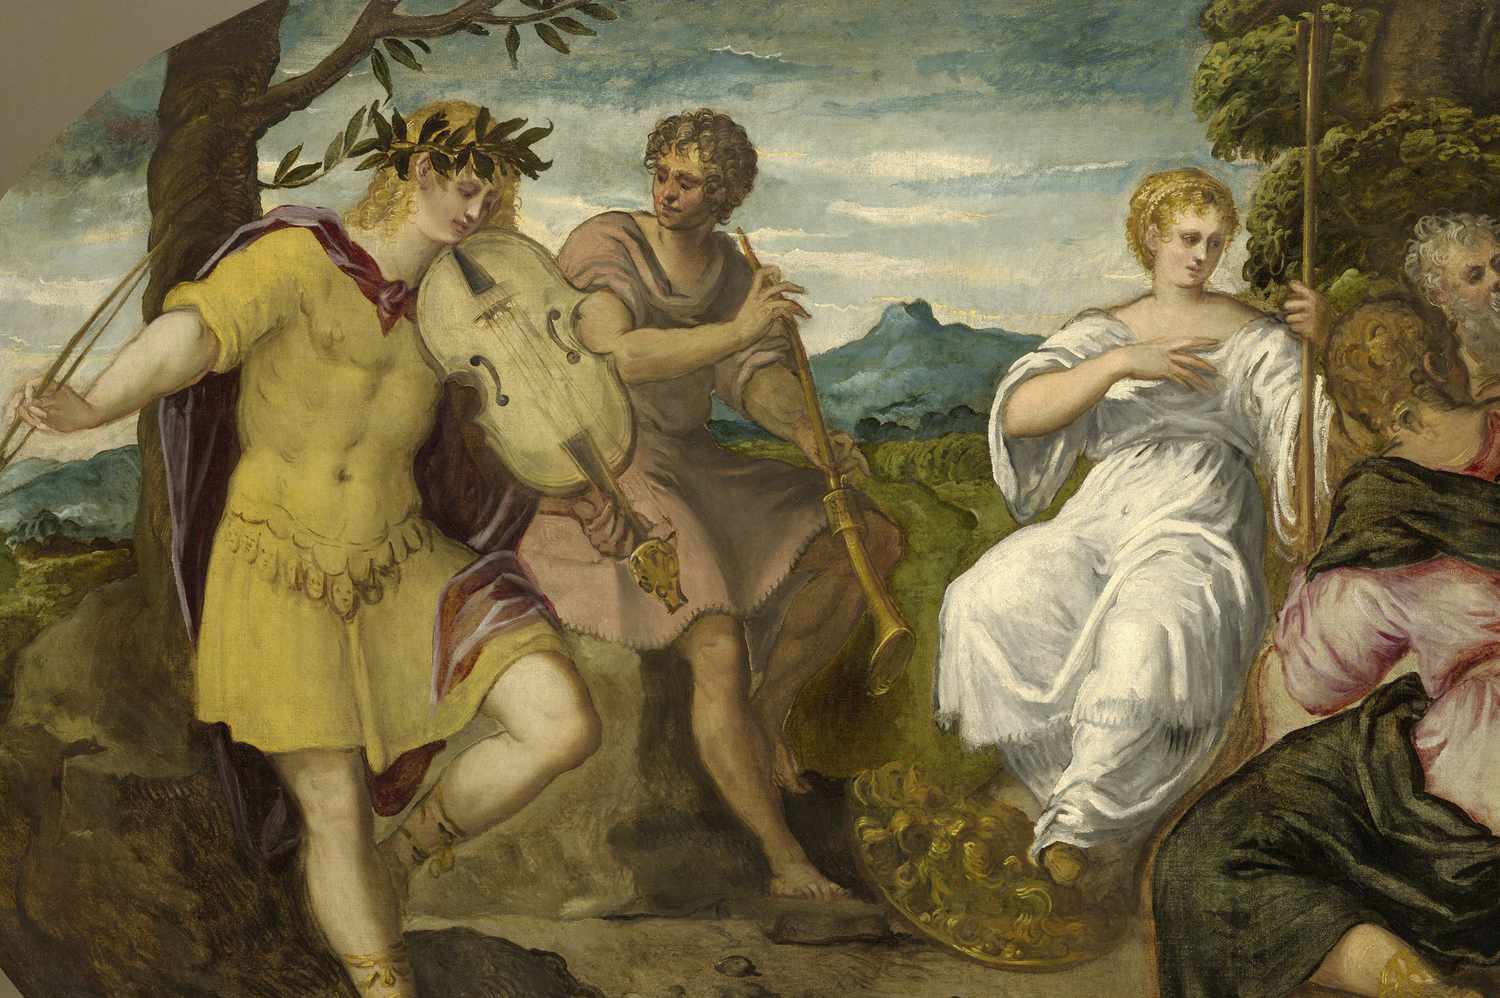 Marsyas challenges Apollo to a musicians' duel